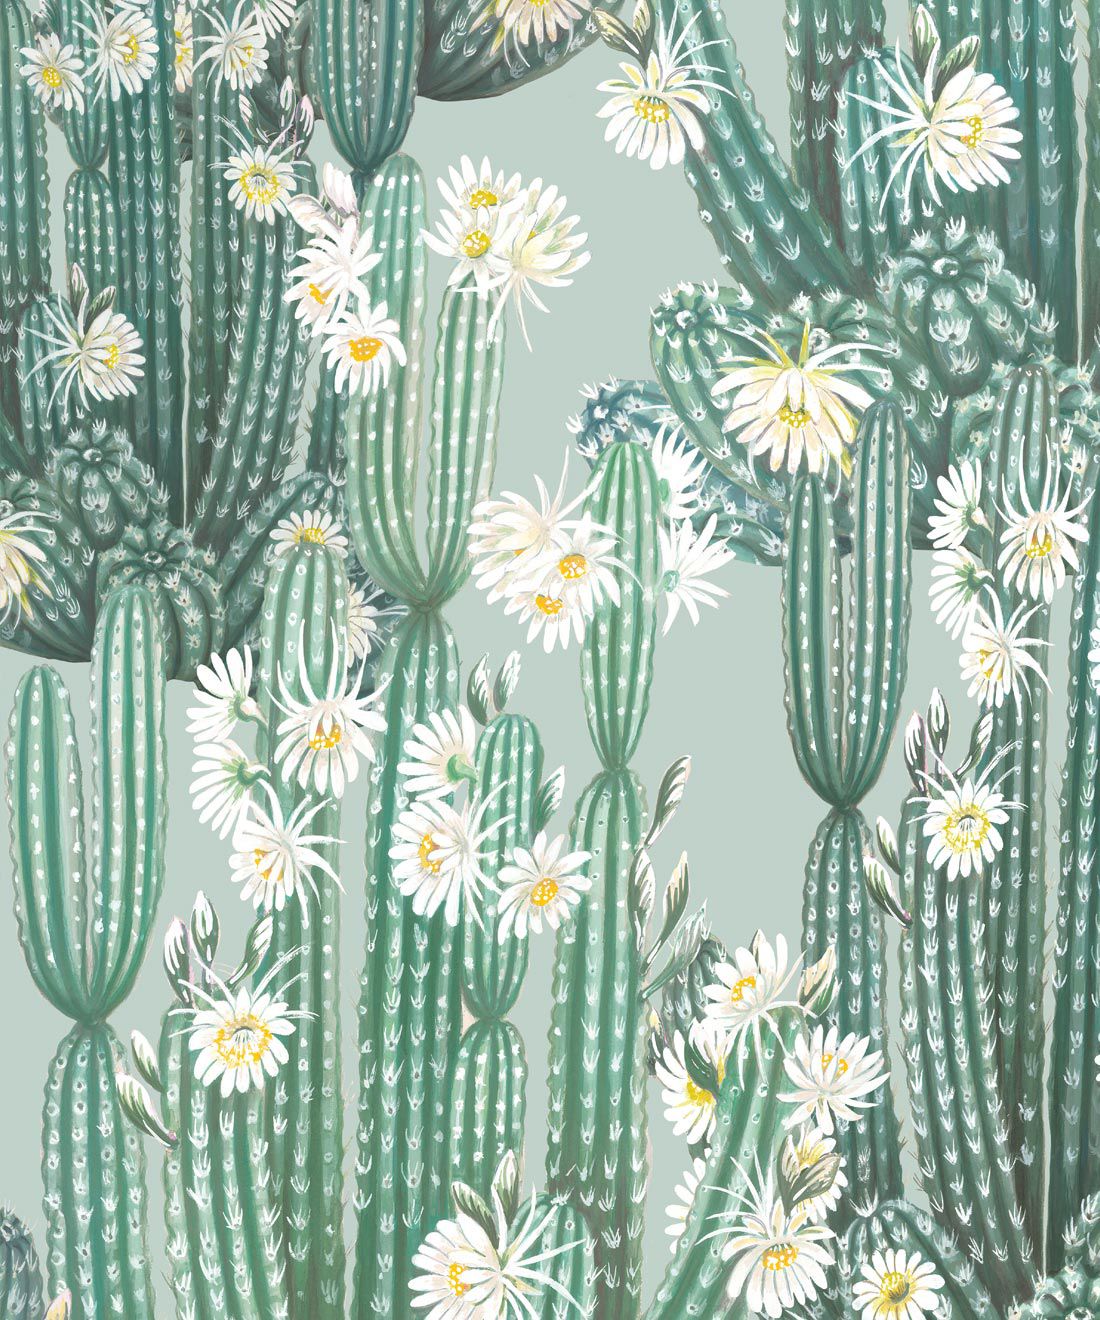 Cactus Wallpaper Posters for Sale  Redbubble